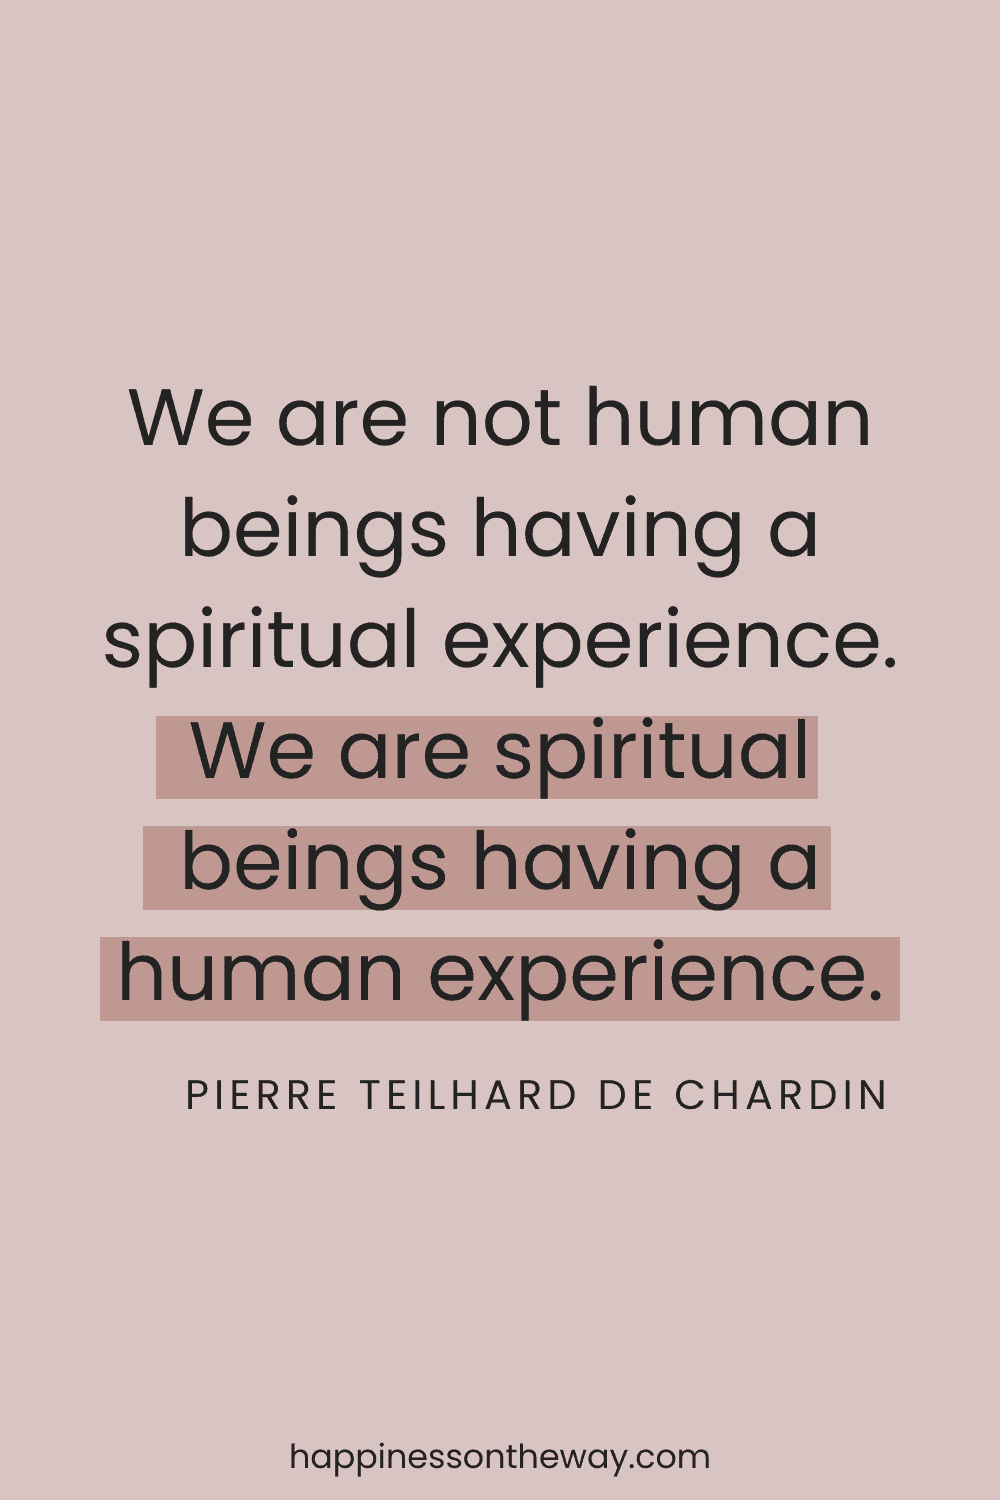 Simple yet profound quote on spirituality 'We are not human beings having a spiritual experience. We are spiritual beings having a human experience.' by Pierre Teilhard de Chardin